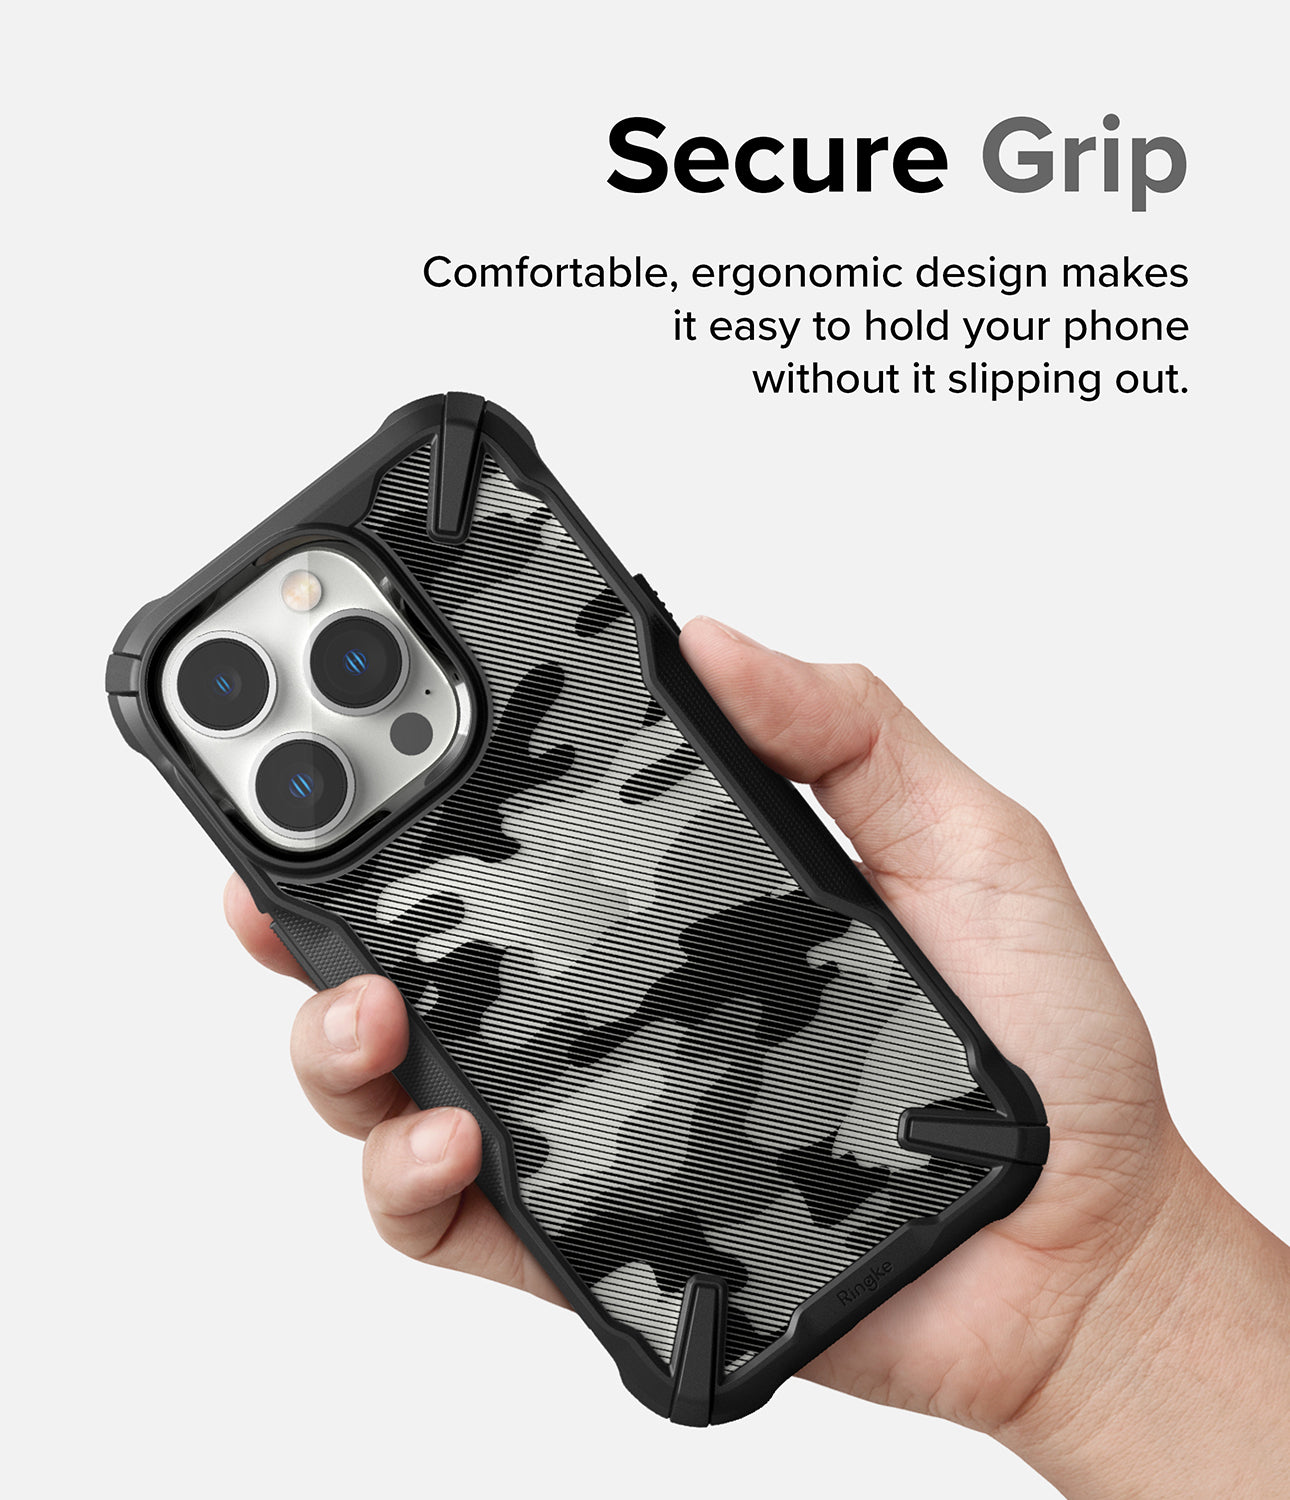 iPhone 14 Pro Max Case | Fusion-X - Camo Black - Secure Grip. Comfortable, ergonomic design makes it easy to hold your phone without it slipping out.